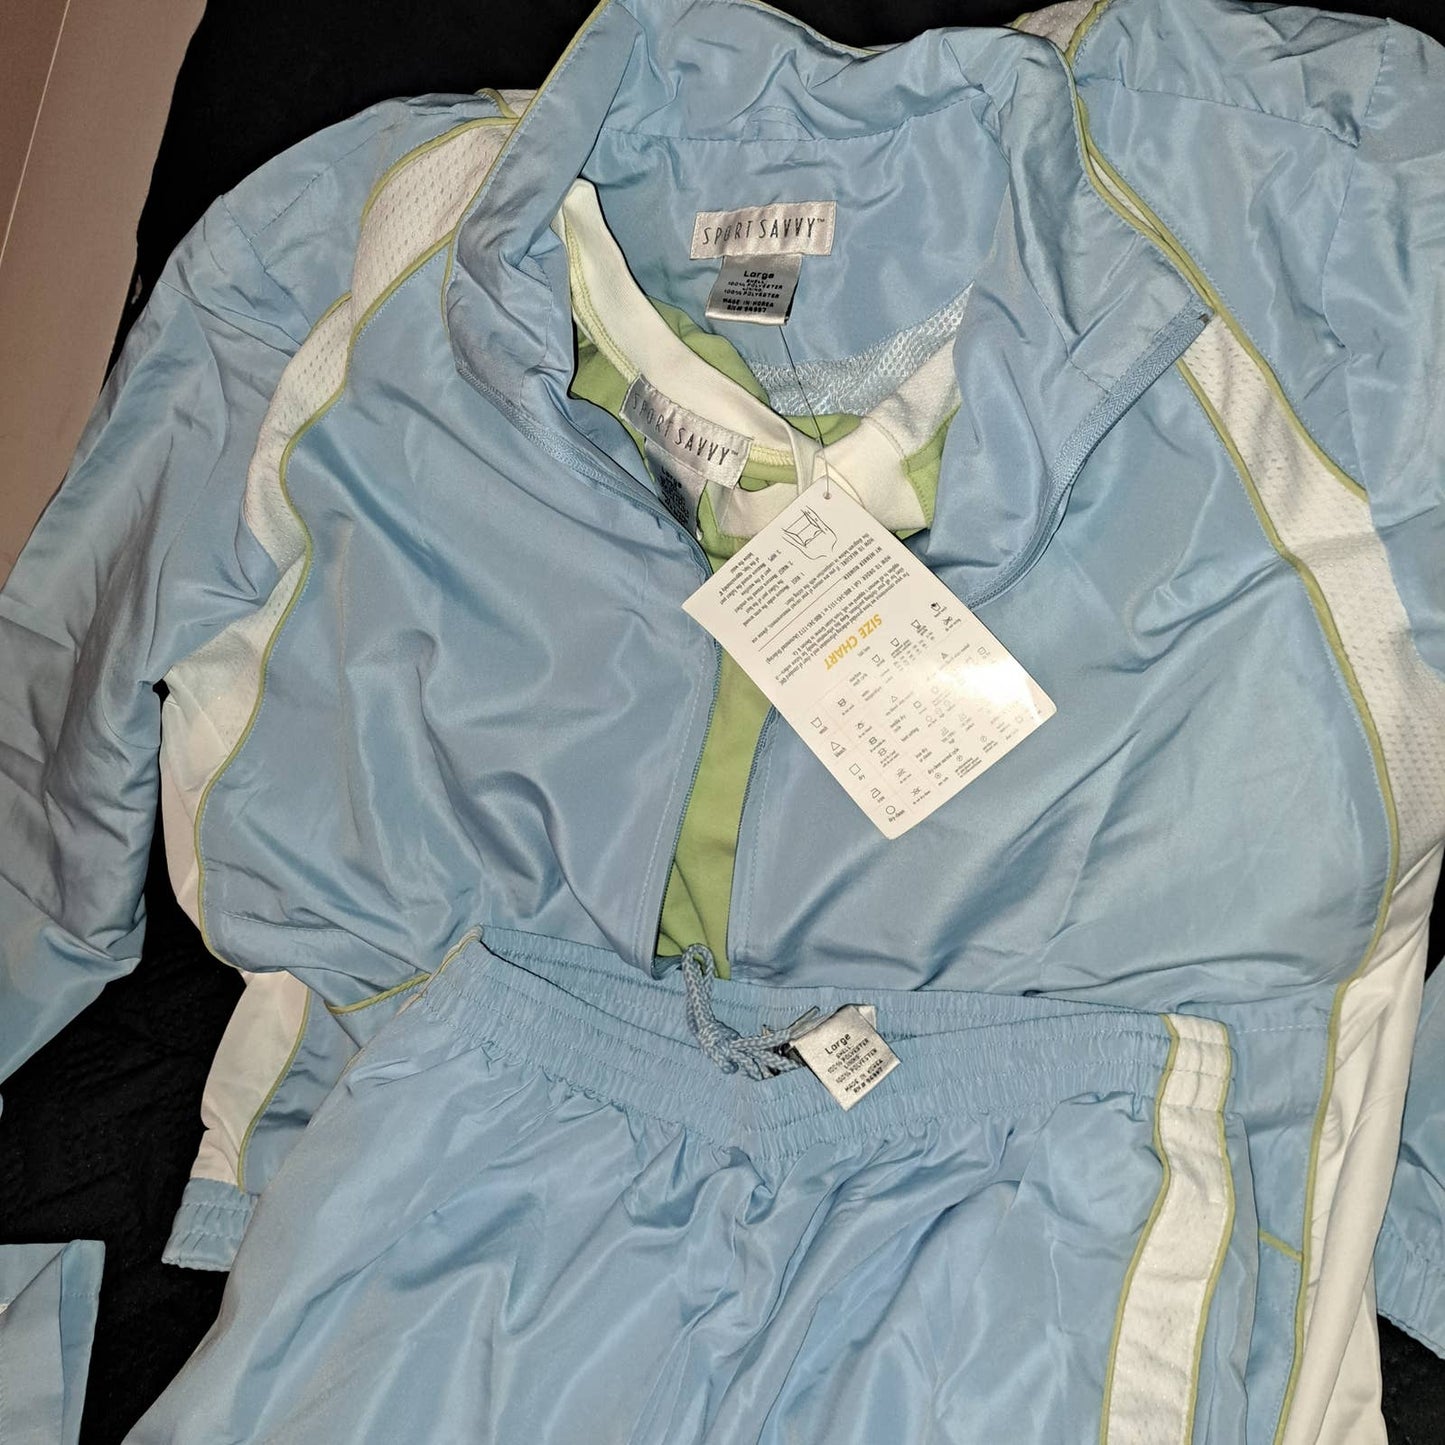 NWT-Sport Savvy 3PC Warm Up Suit Blue/Green, White Mesh Trim Large